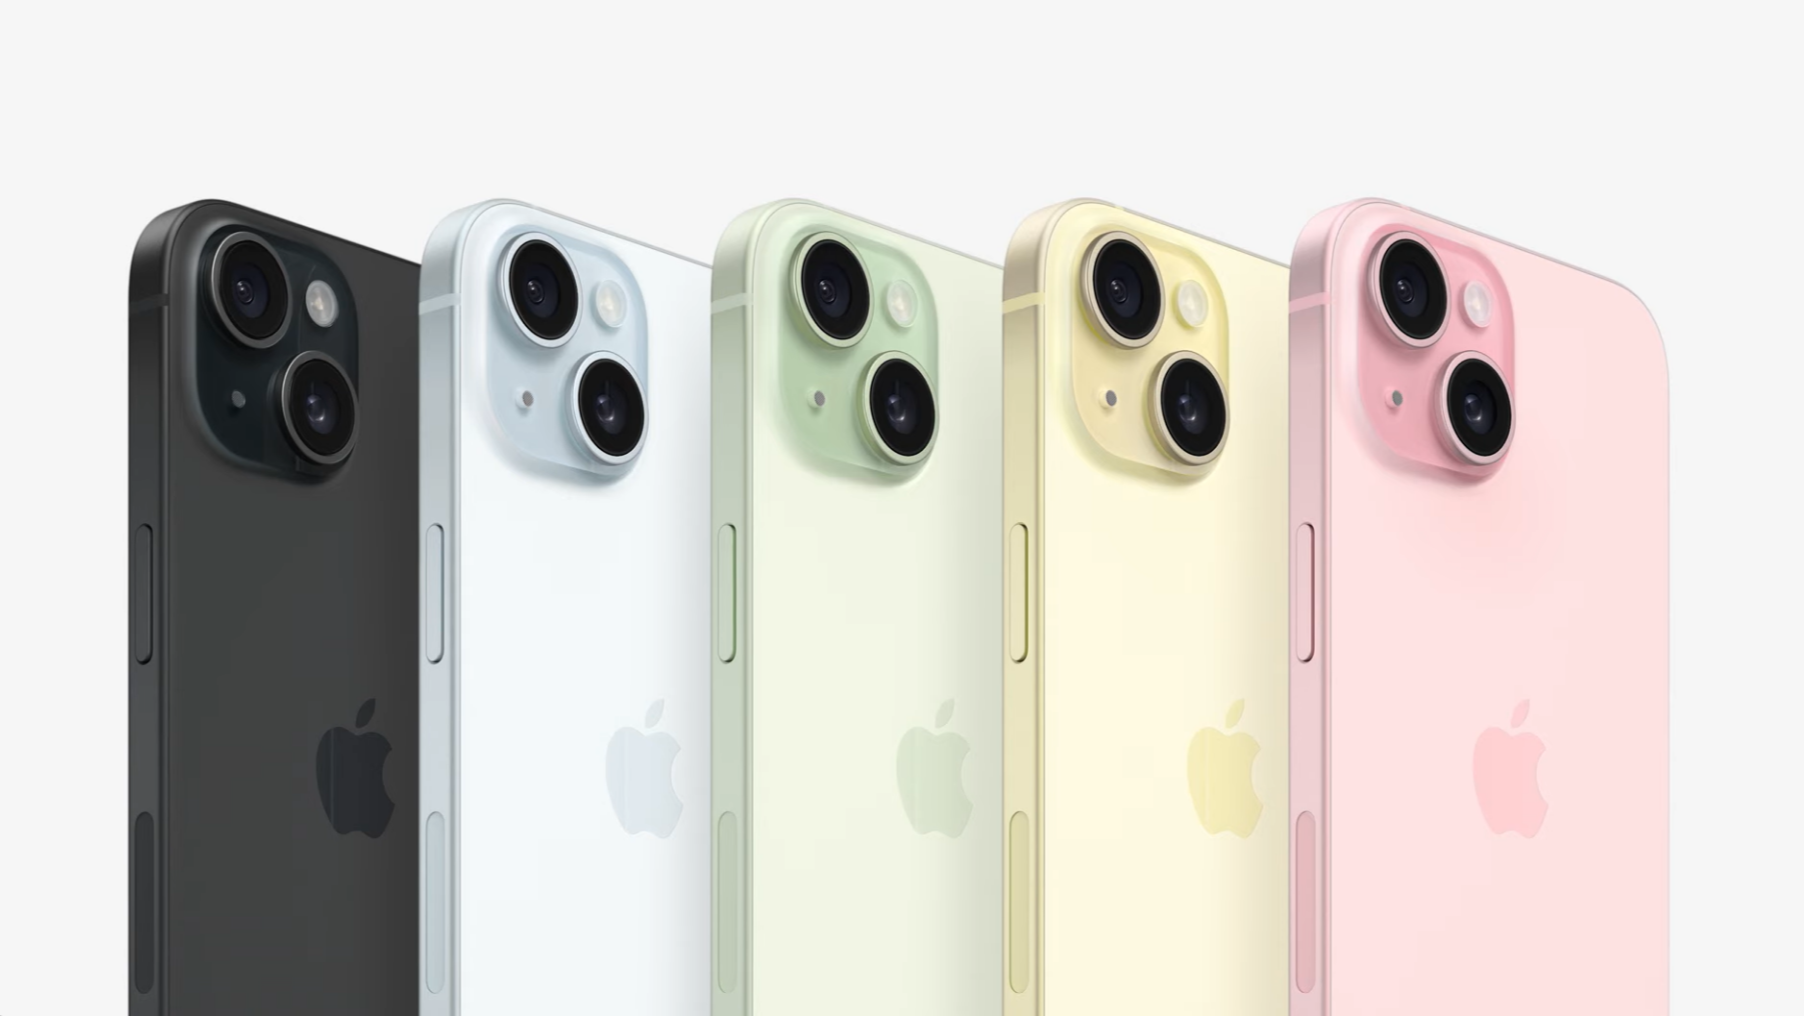 The iPhone 15 in five shades, black, blue, green, yellow, and pink